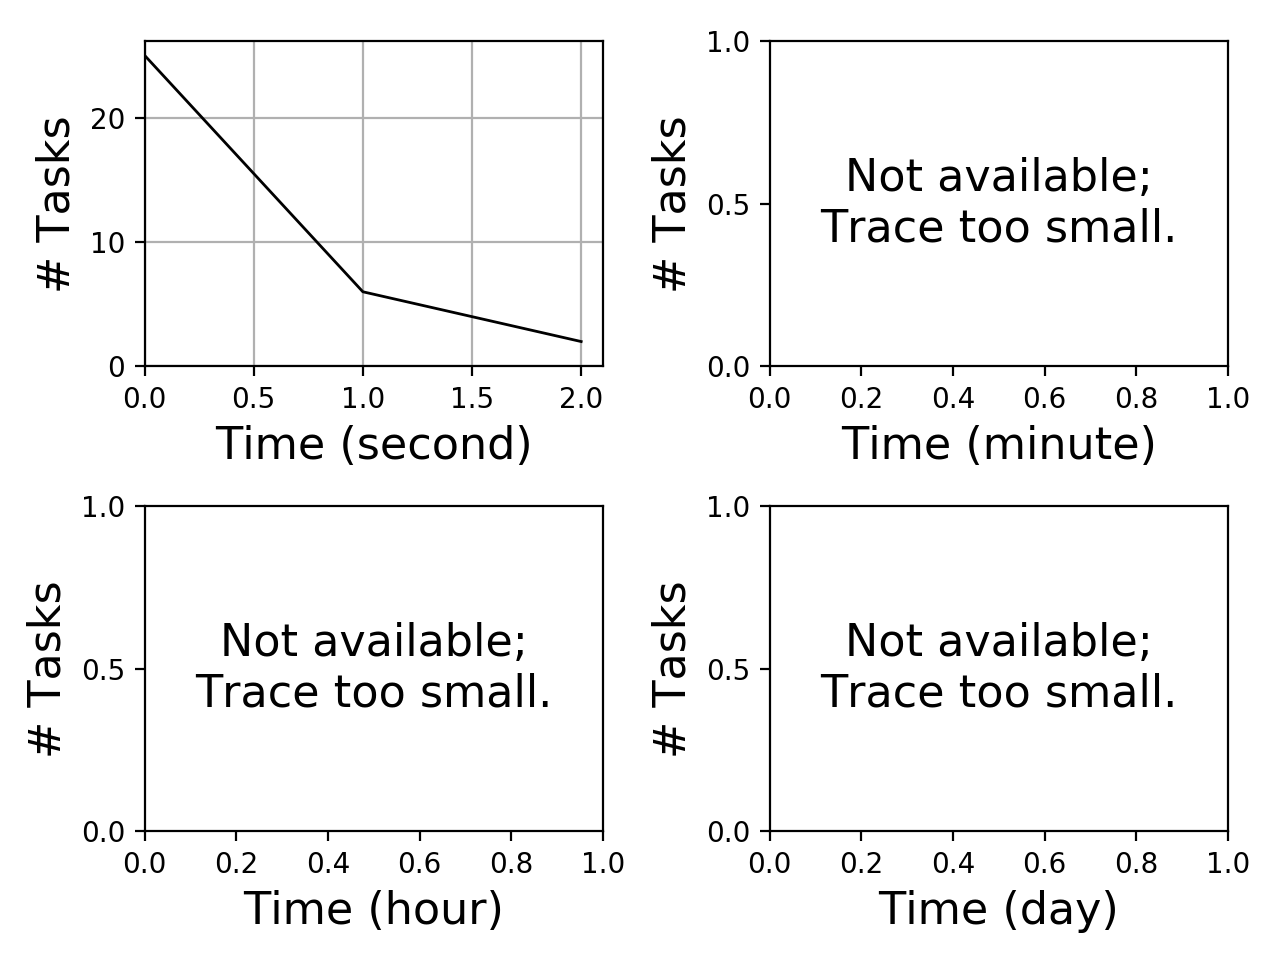 Task arrival graph for the Pegasus_P4 trace.